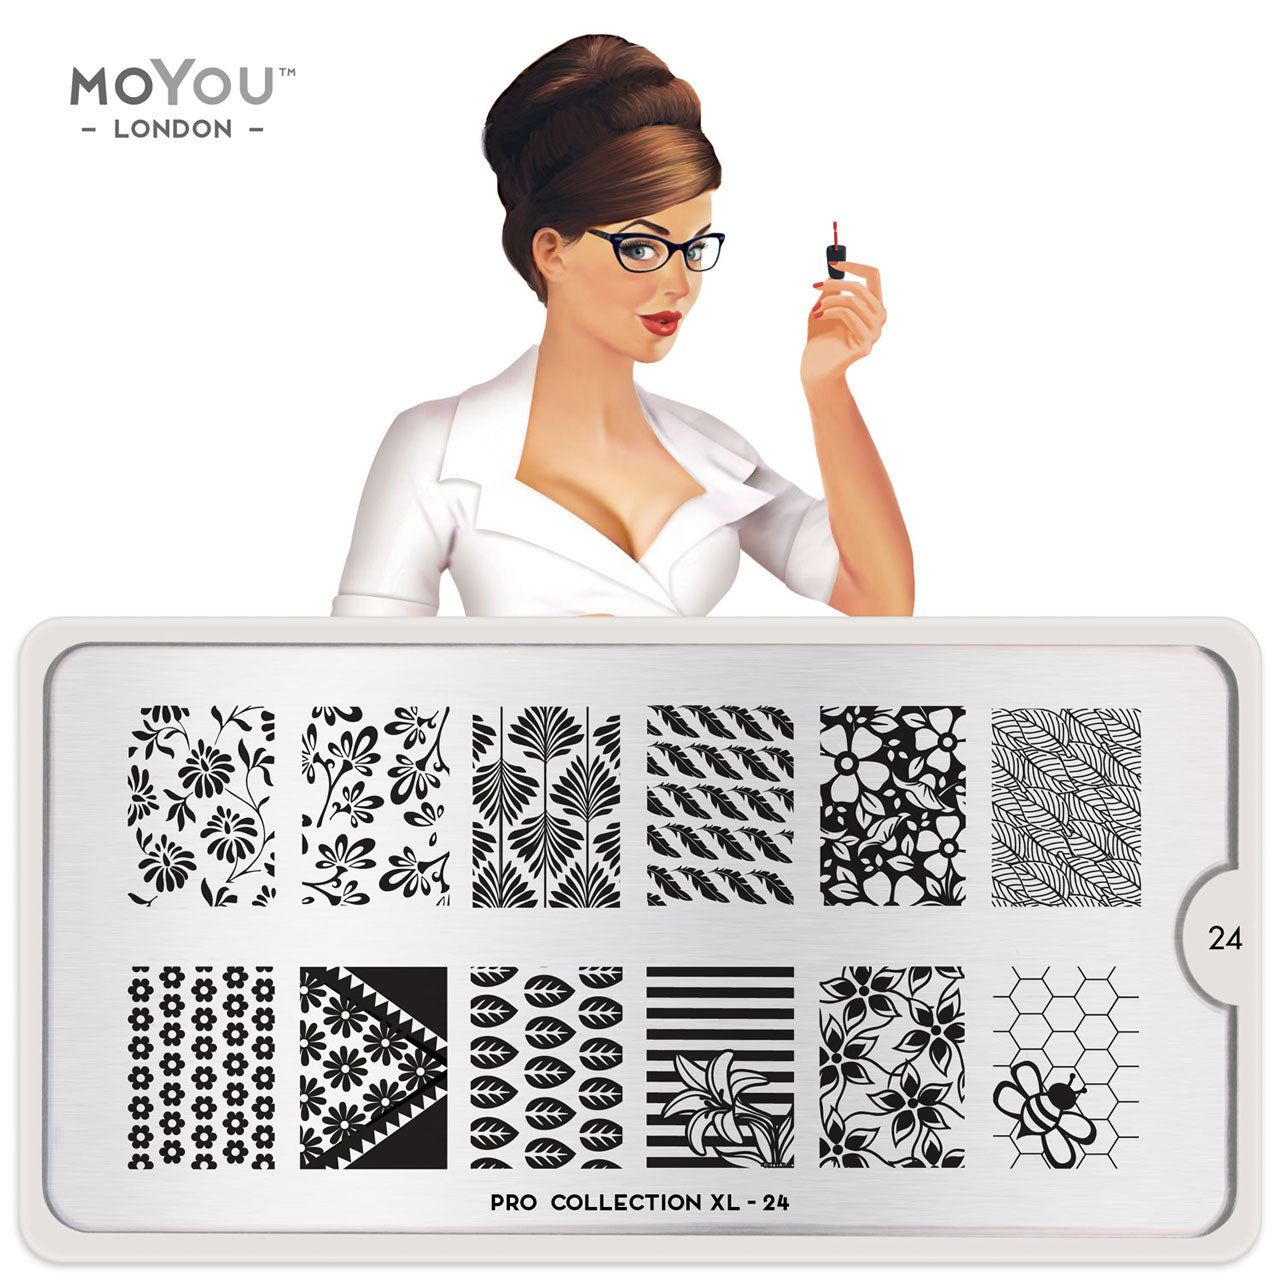 Plaque Stamping Pro XL 24 - MoYou London